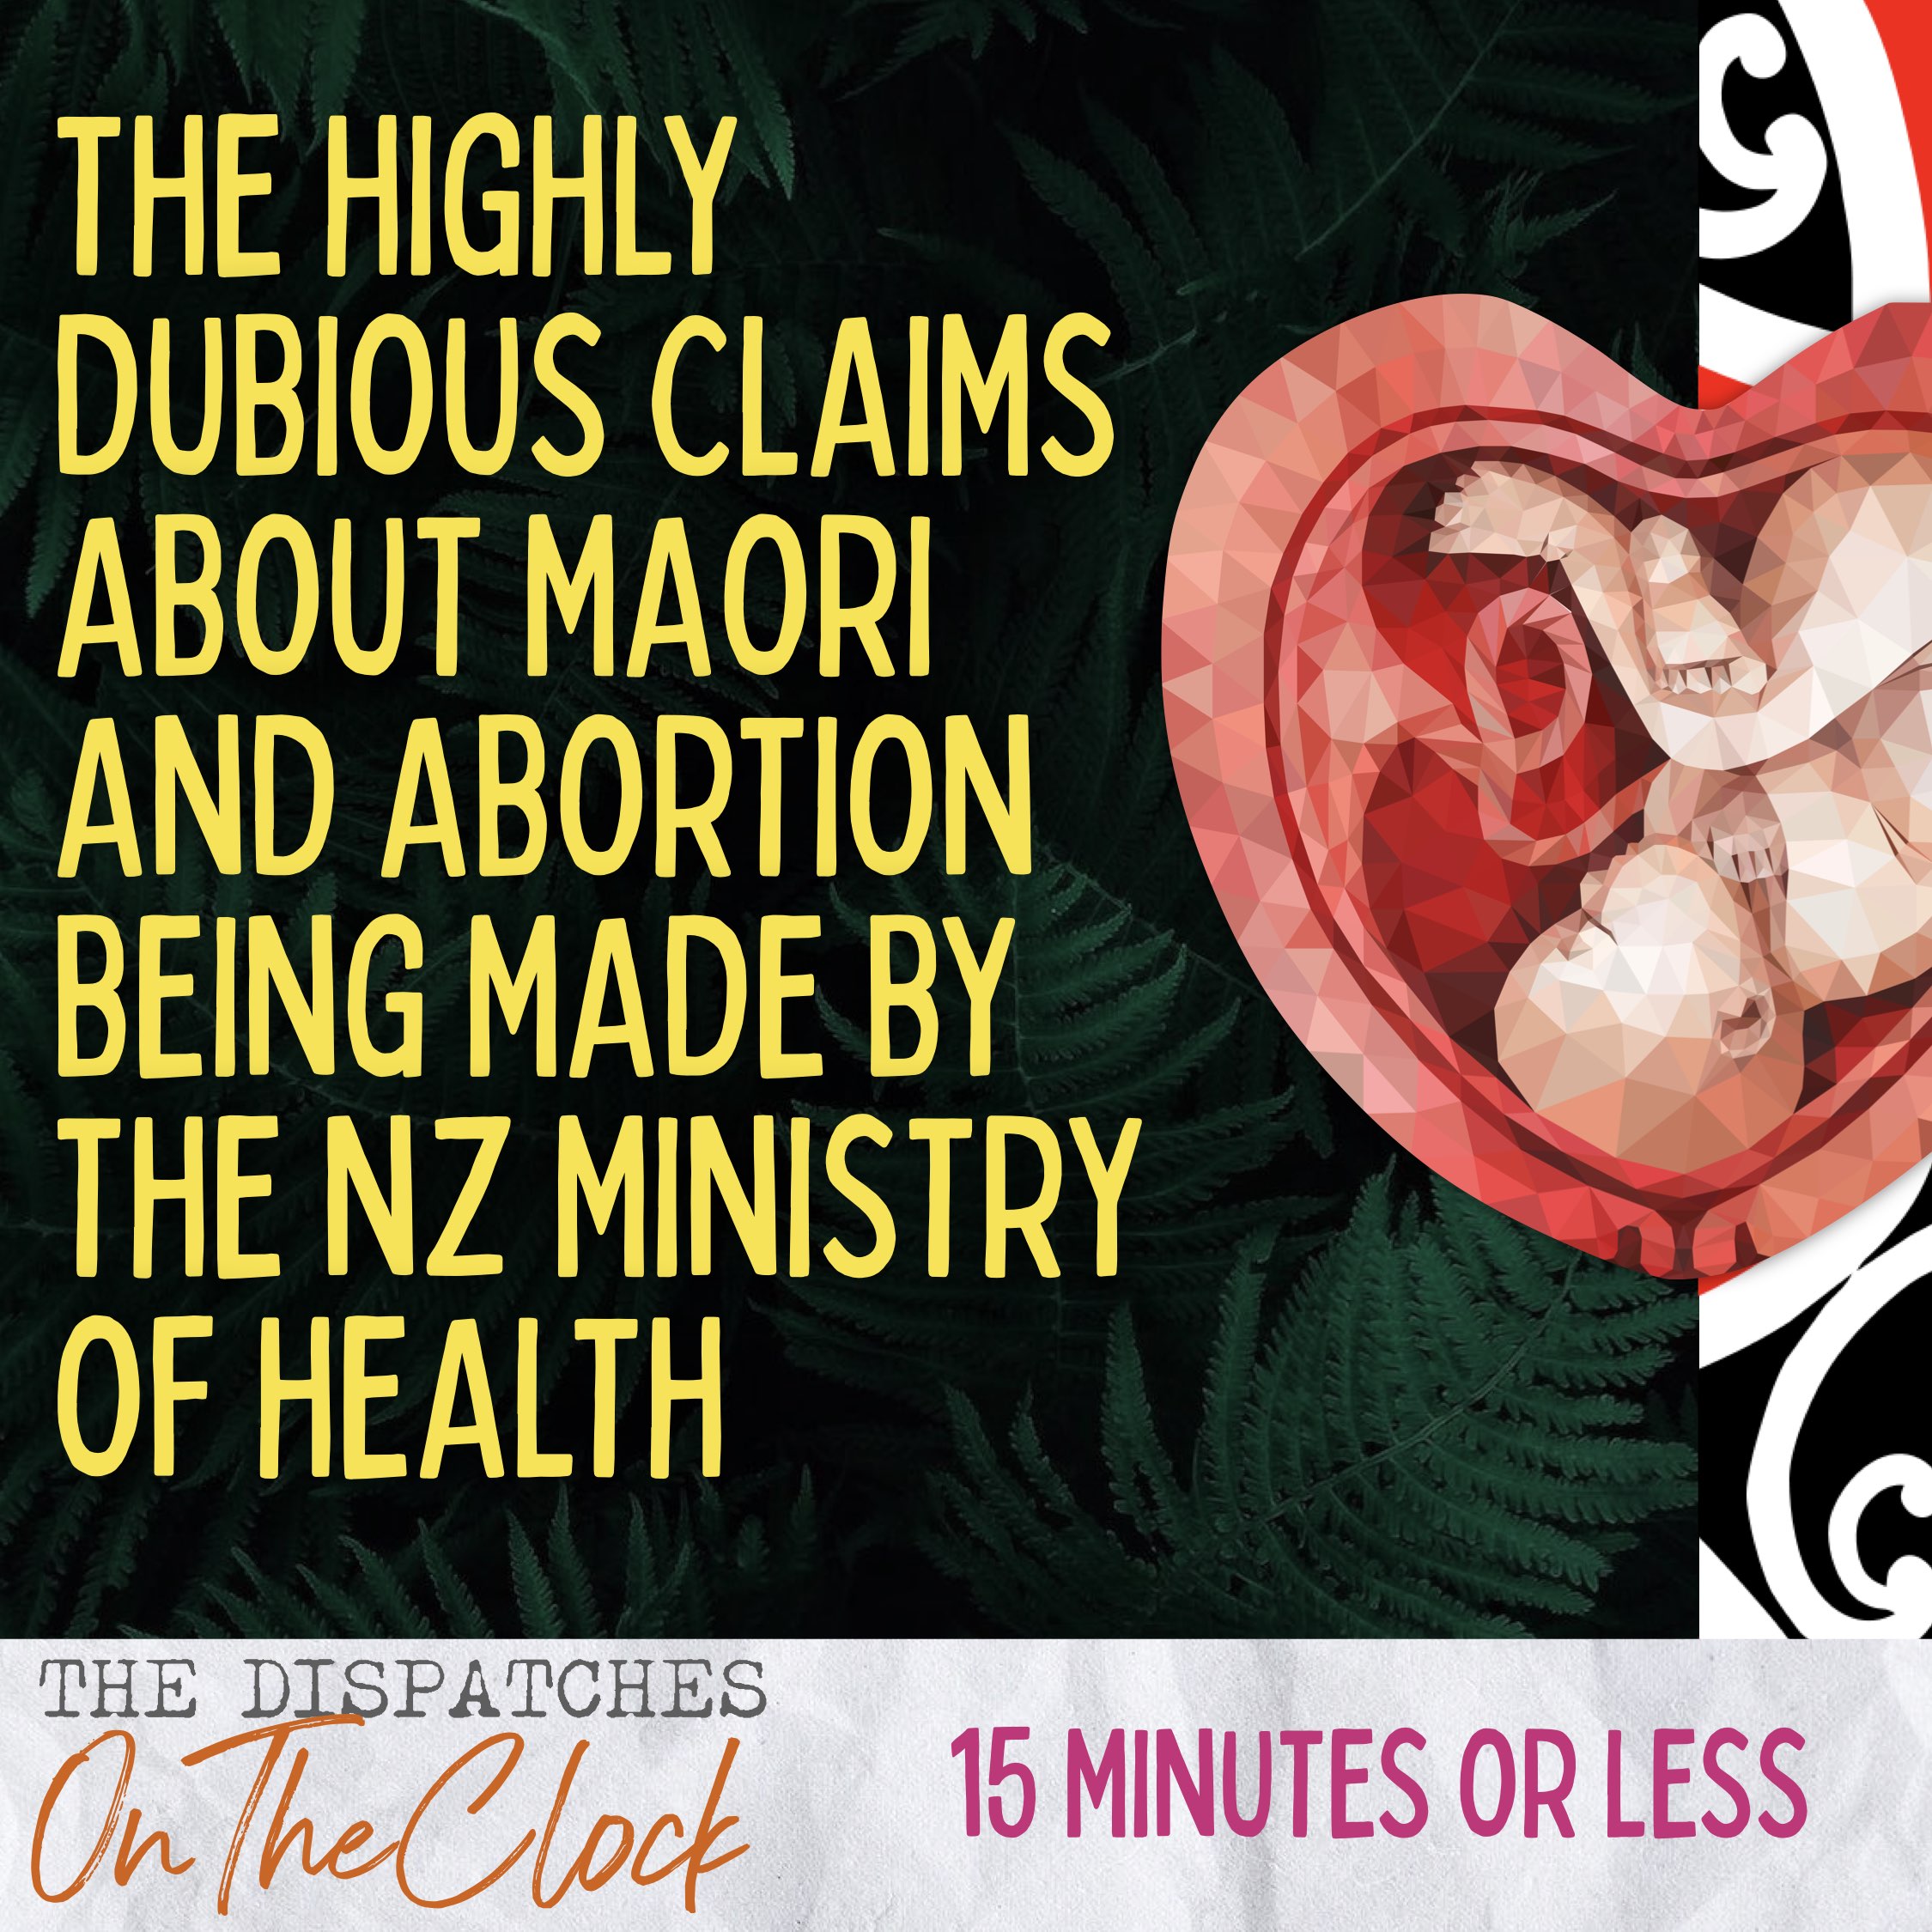 ON THE CLOCK | The Highly Dubious Claims About Maori and Abortion Being Made by the NZ Government